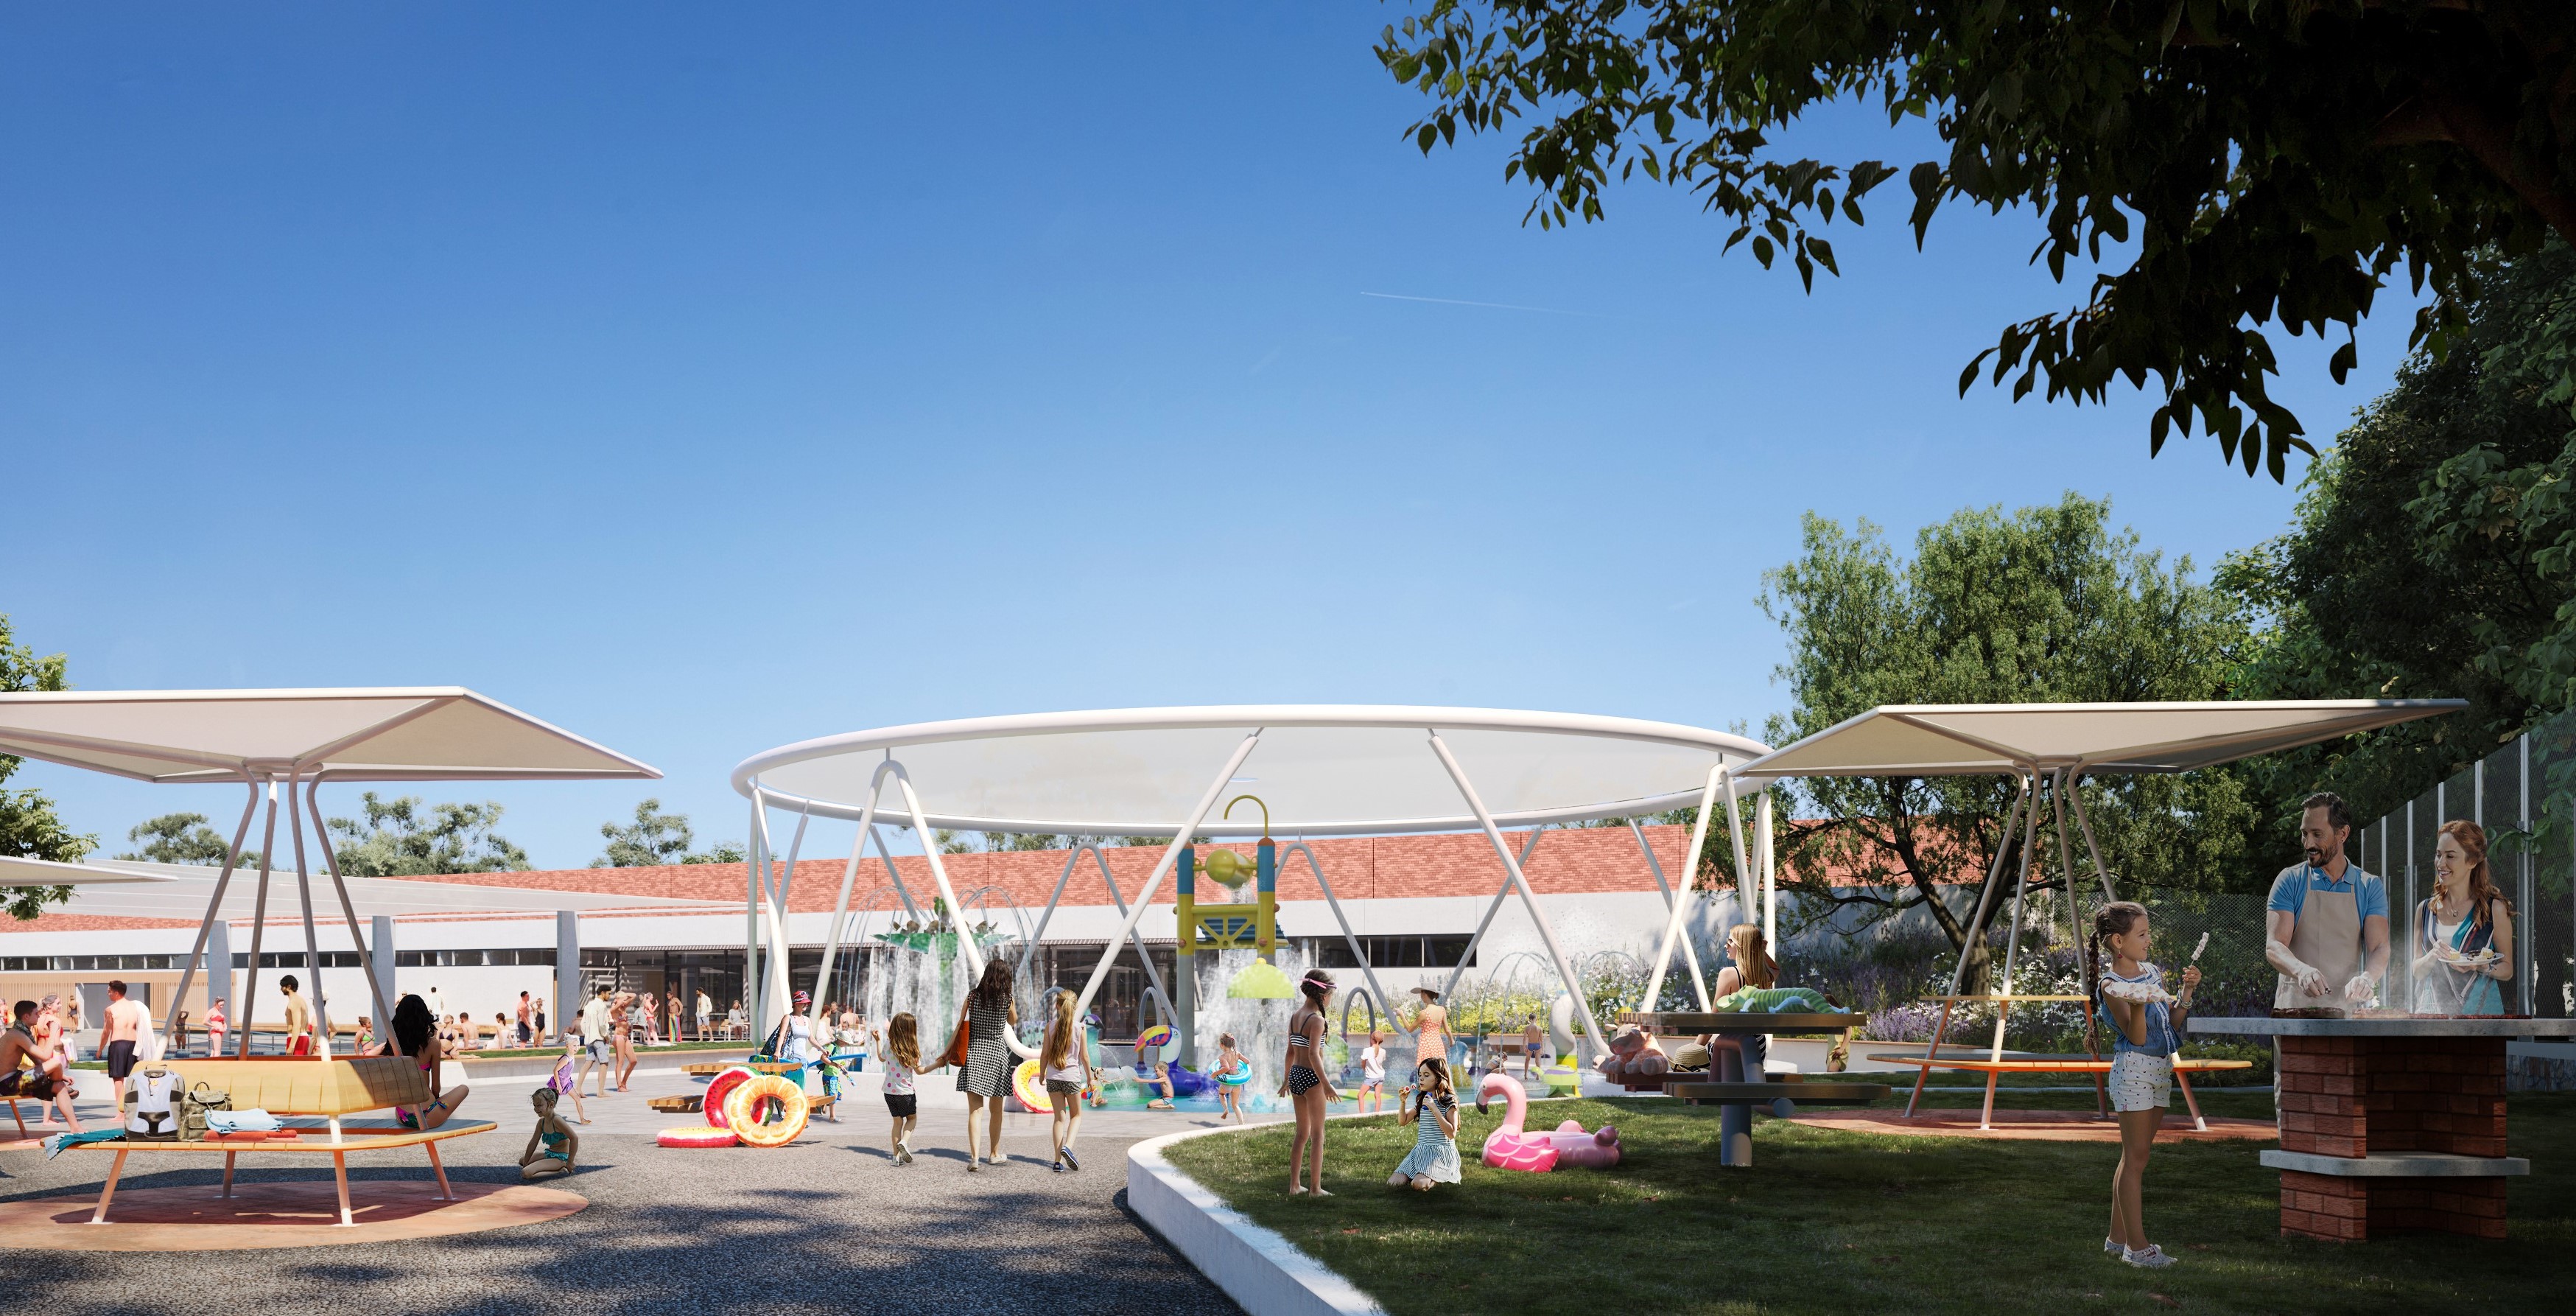 Artist rendering of Carnegie Swim Centre showing people gathering under shade structures enjoying the pool